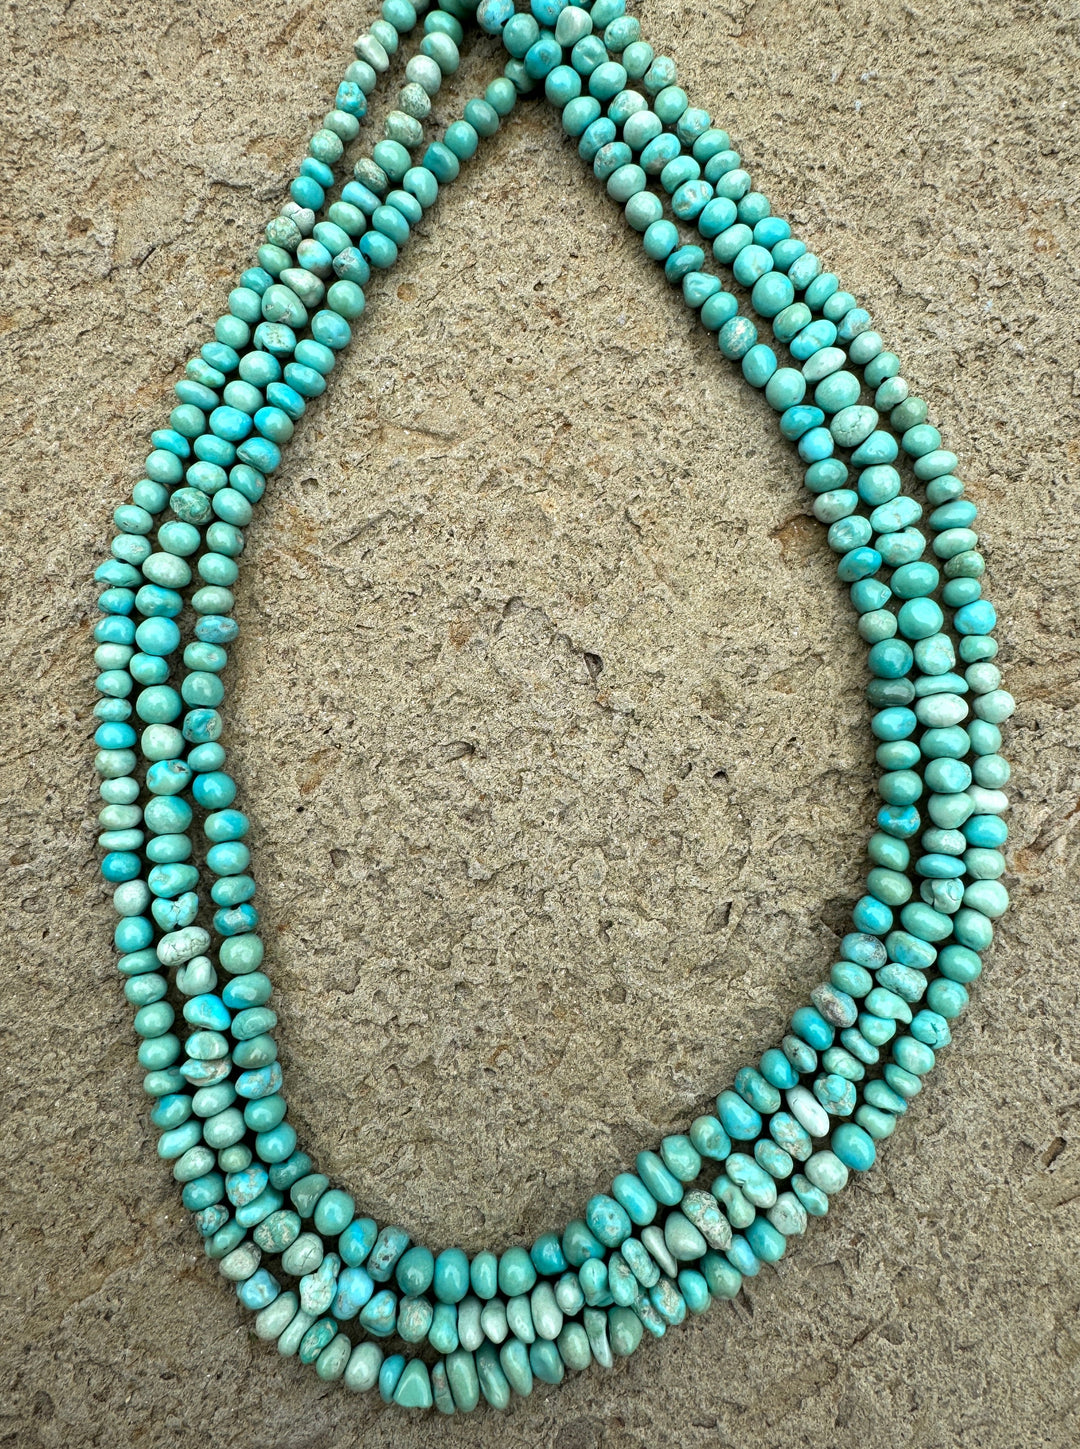 White Water Turquoise (Mexico) 4 - 7mm Nugget Beads 16 inch